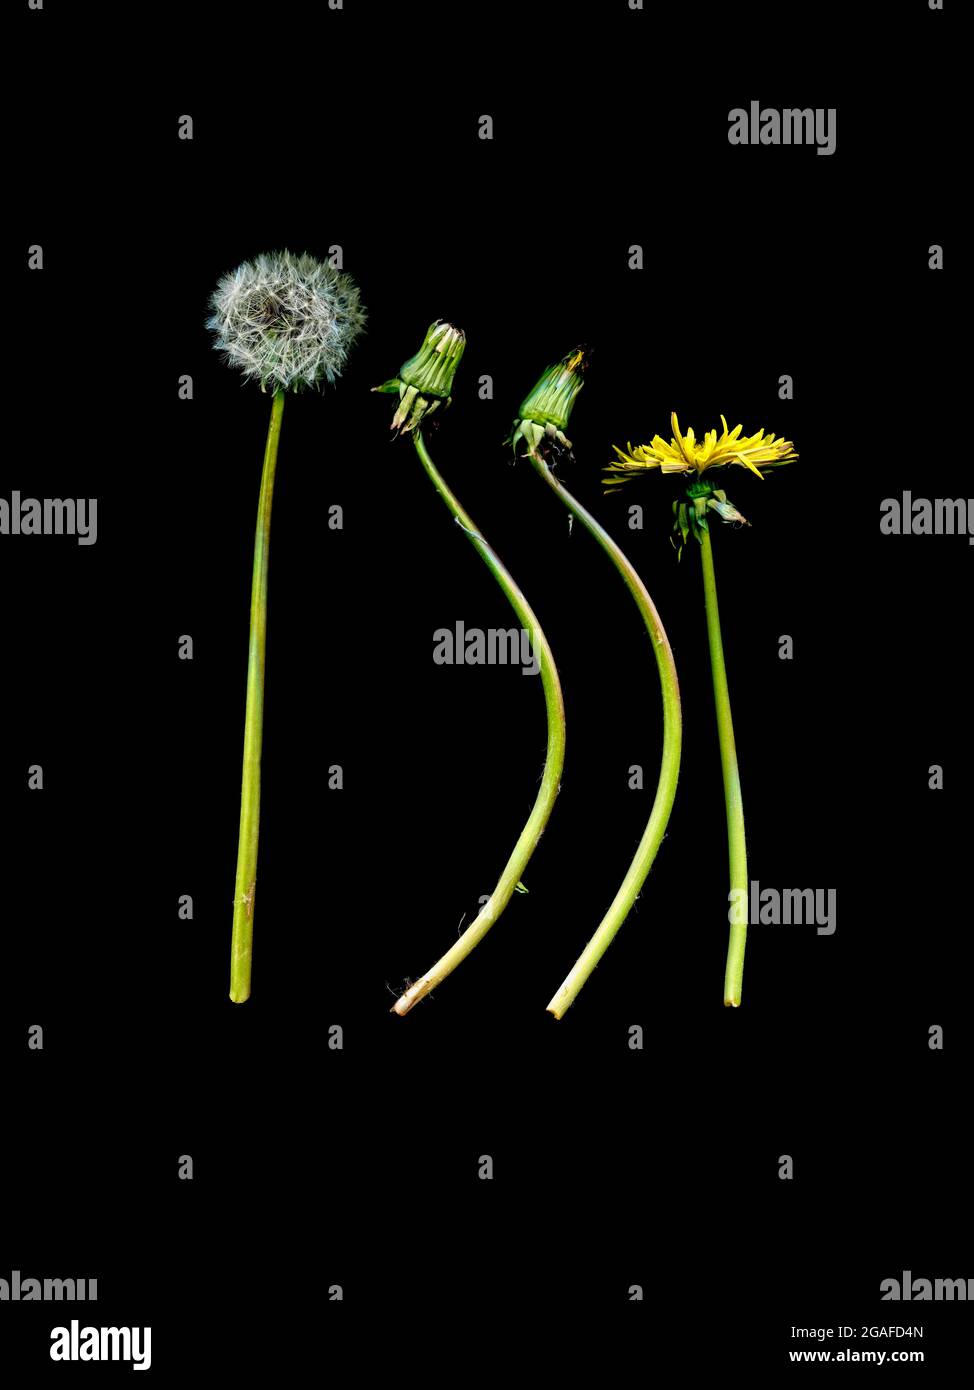 Four dandelions (Taraxacum officianalis) in various stages of development from bud to bloom to seedhead. Stock Photo